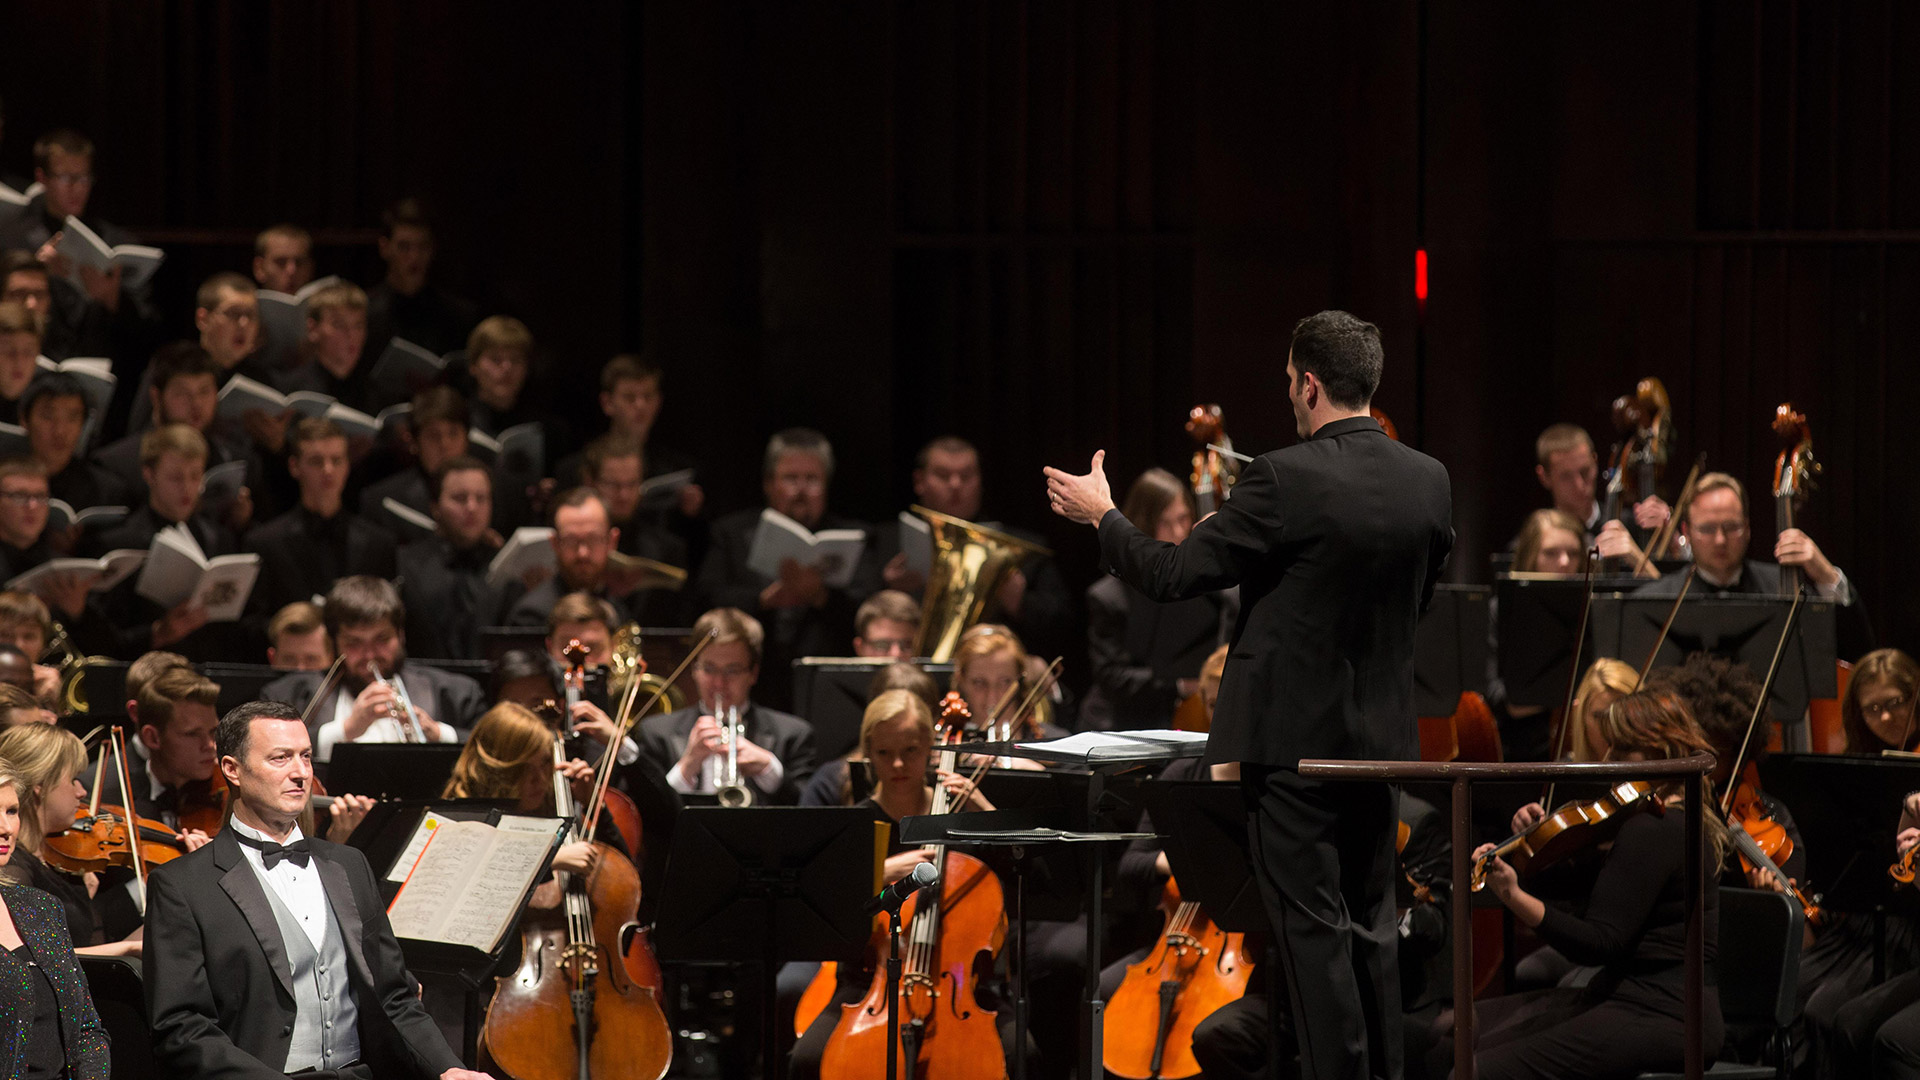 Dr. Cameron LaBarr leads Missouri State Orchestra and Choral groups